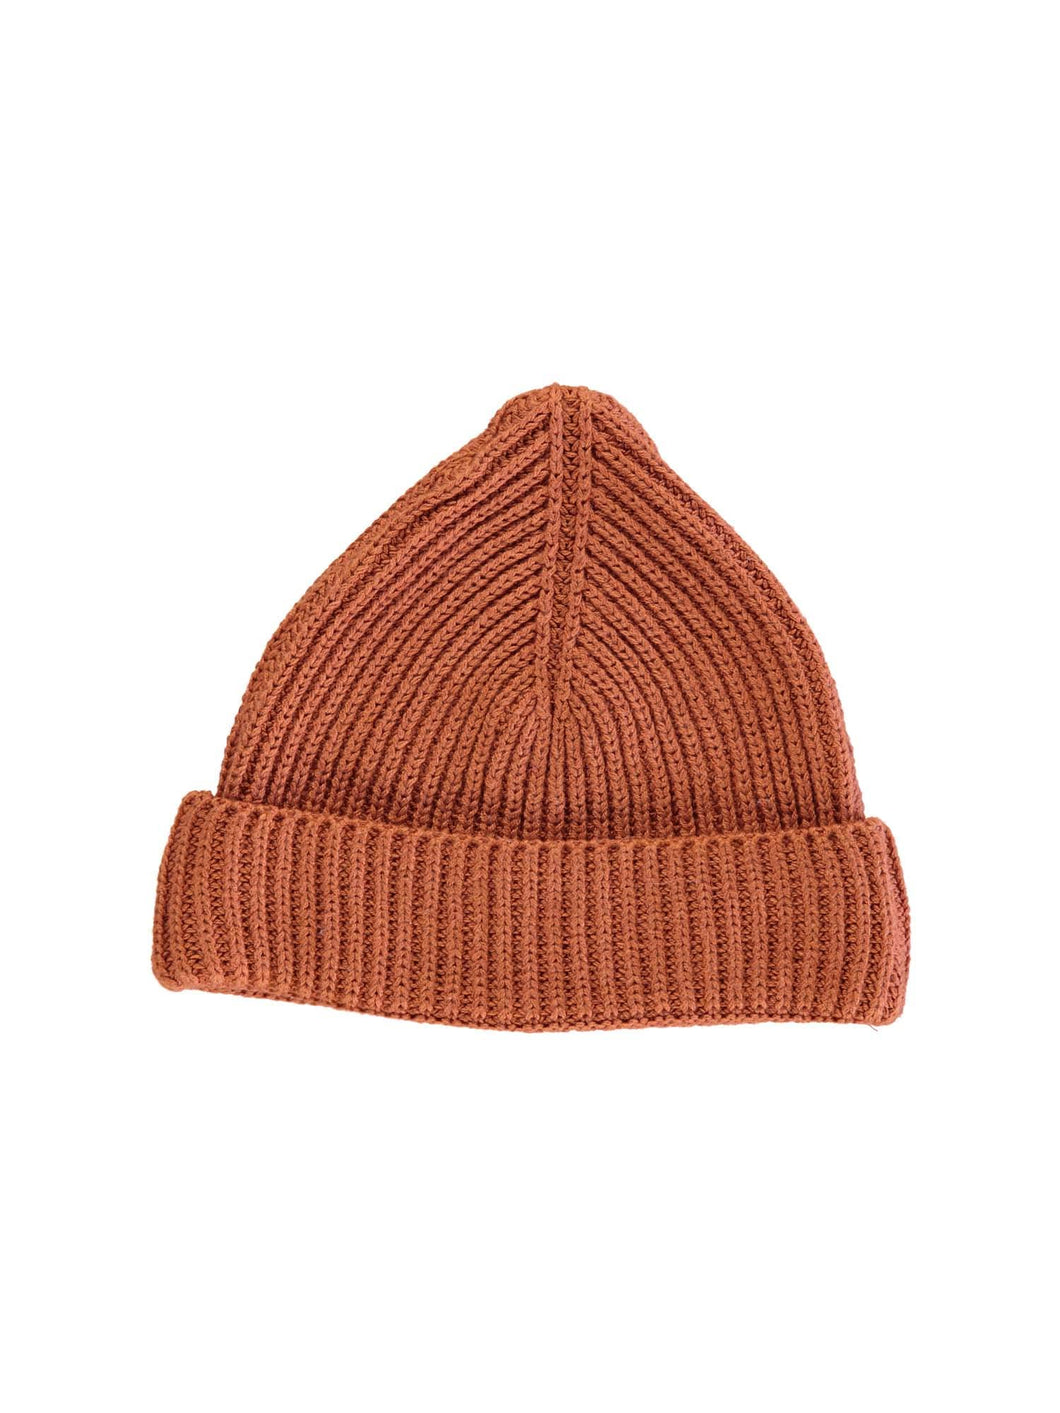 Copper Knit Beany